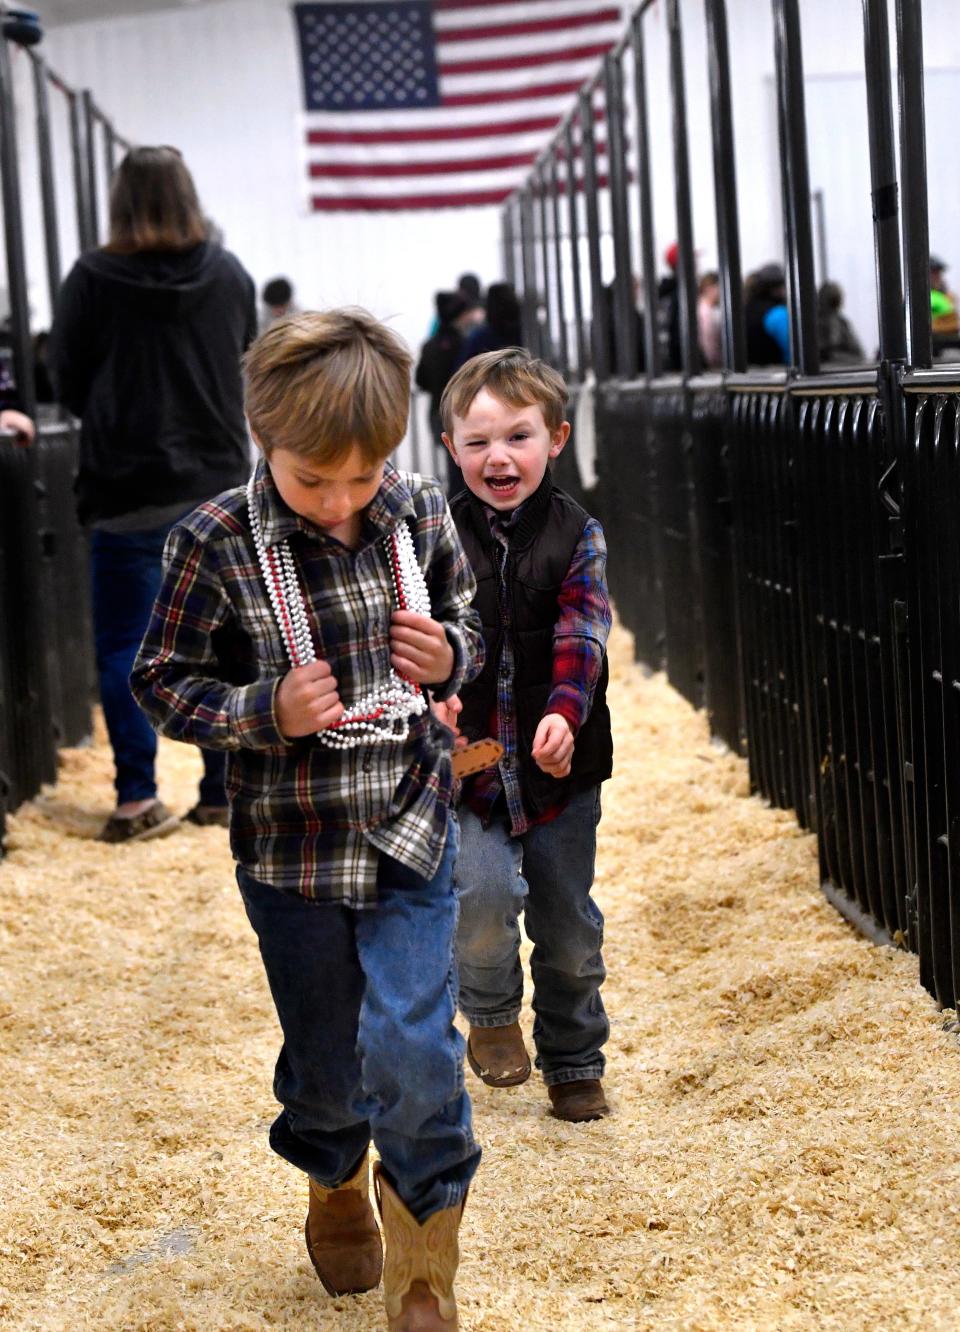 Tres Besner, 6, is chased by his four-year-old brother down the stock pen alleys as the sale goes on in the next room at the Shackleford County Youth & Livestock Show in Albany Jan. 20.